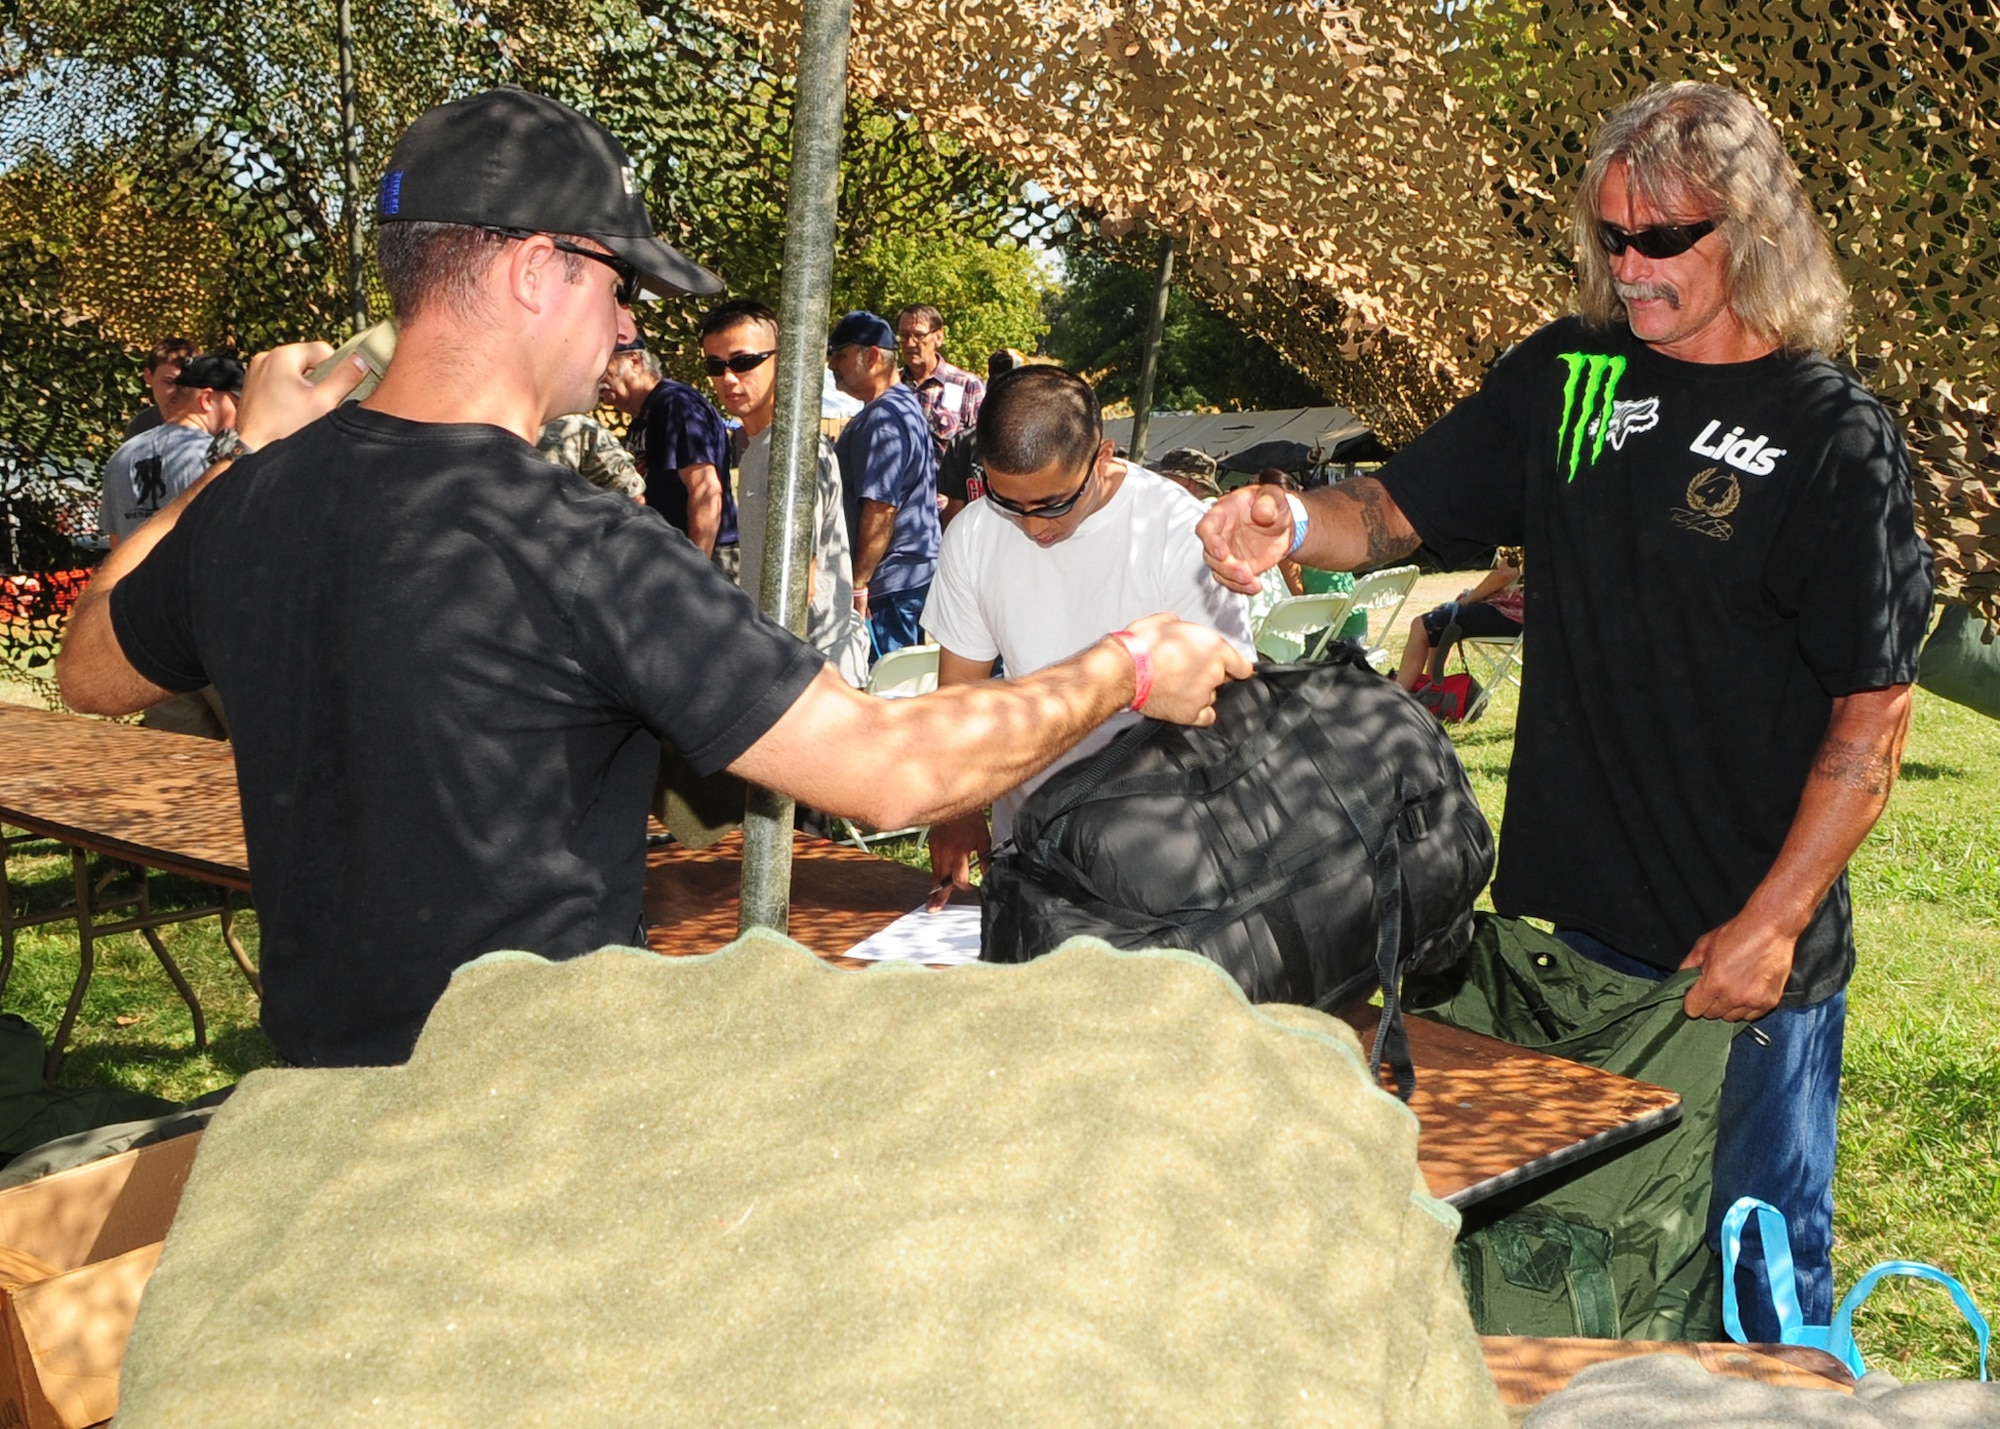 A volunteer from Beale Air Force Base, Calif., provides a new sleeping bag for Cole Young, a homeless U.S. Army veteran during the 2012 Veteran's Stand Down at River Bottoms Park in Marysville, Calif., August 24, 2012. The annual stand down provided basic needs, such as medical, financial, mental and religious services to veterans and their families and especially targeted homeless and less fortunate veterans. (U.S. Air Force photo by Senior Airman Shawn Nickel)